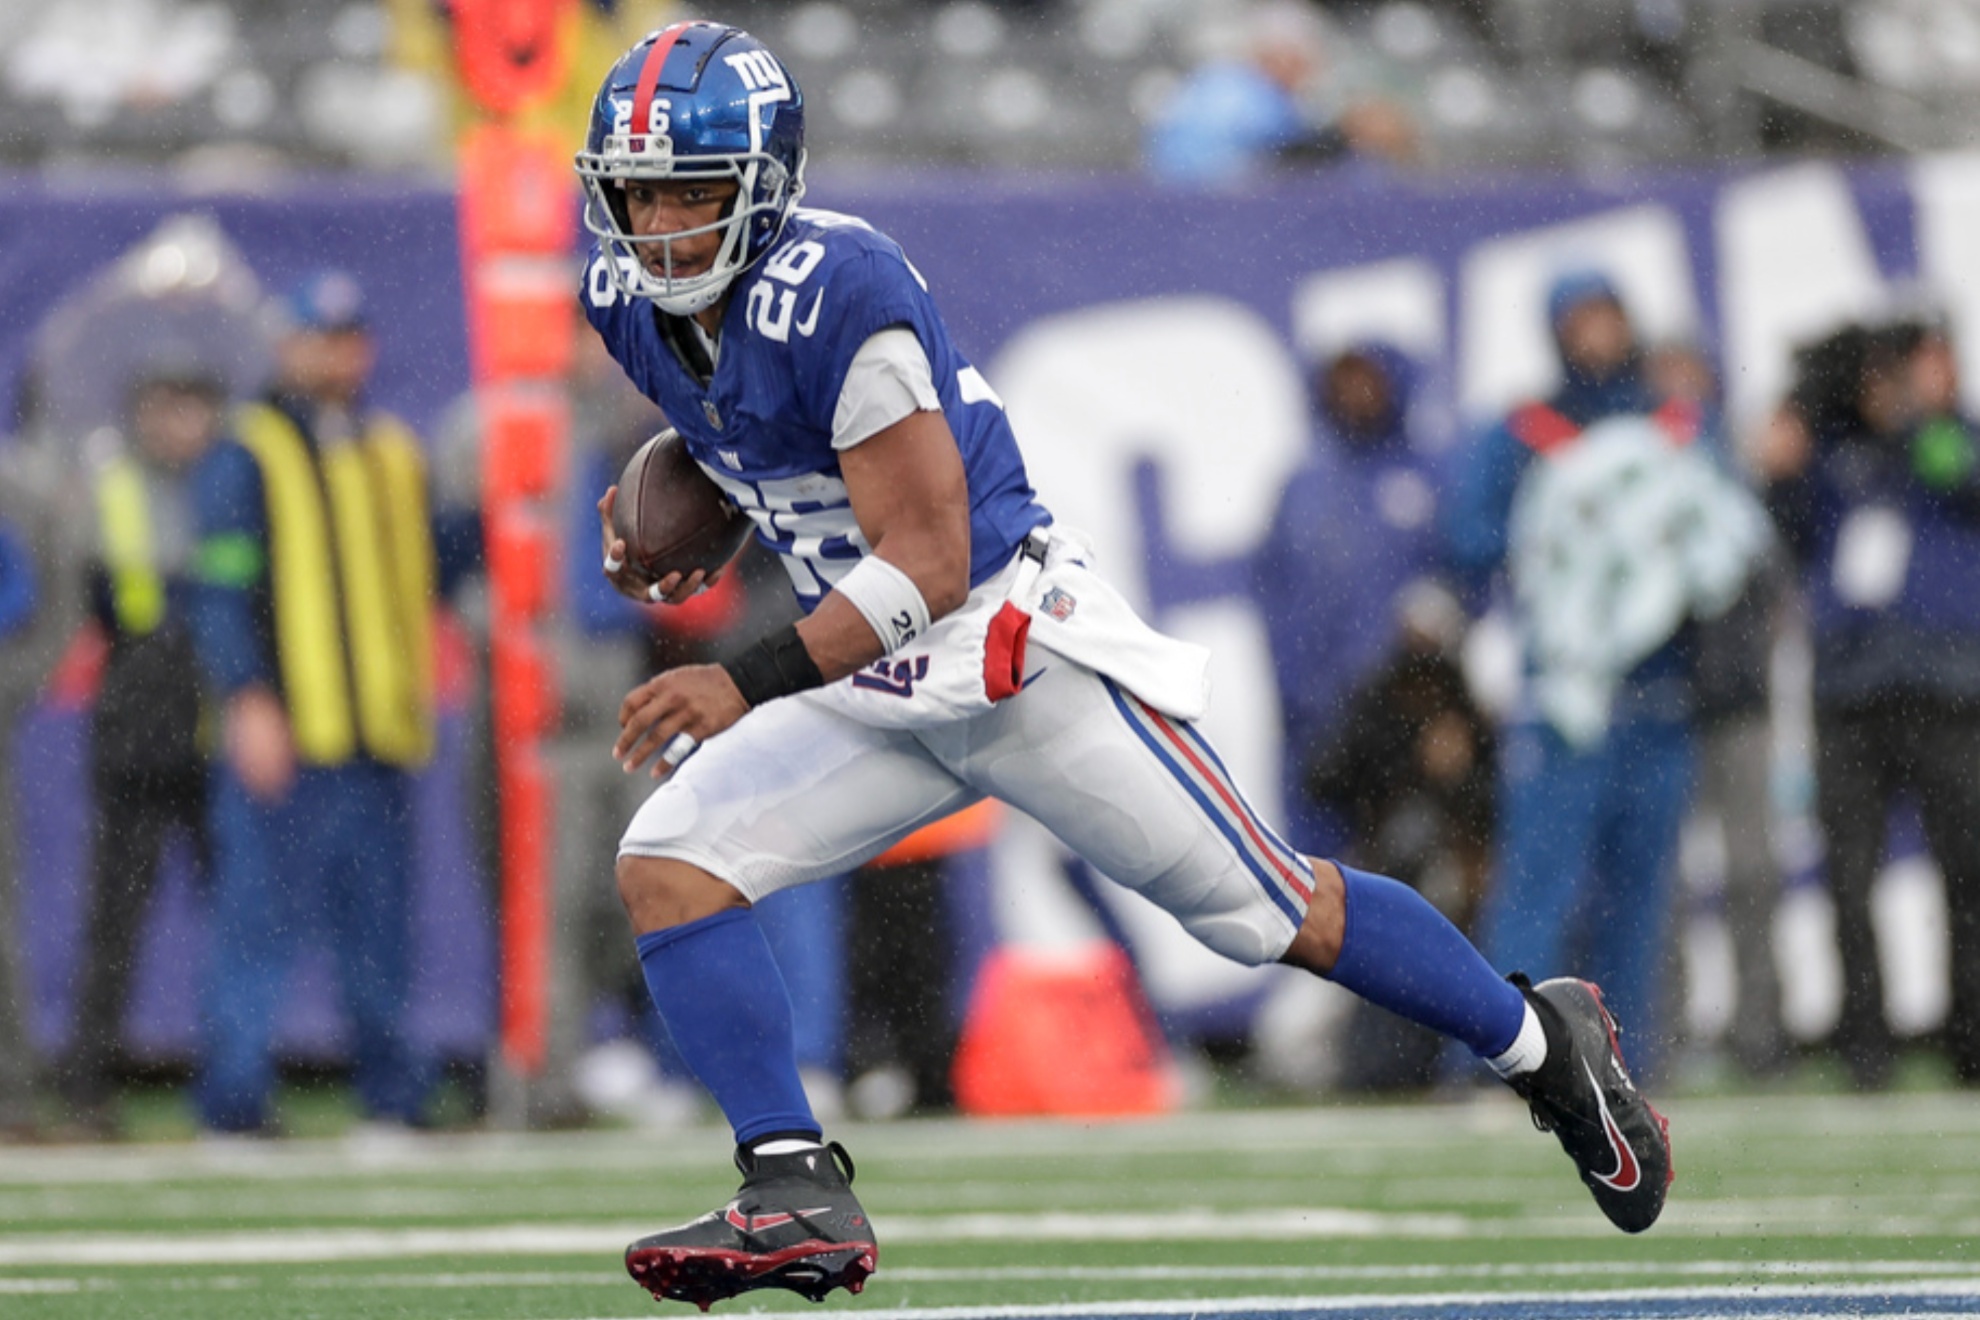 Giants running back Saquon Barkley is exploring his options as he nears free agency